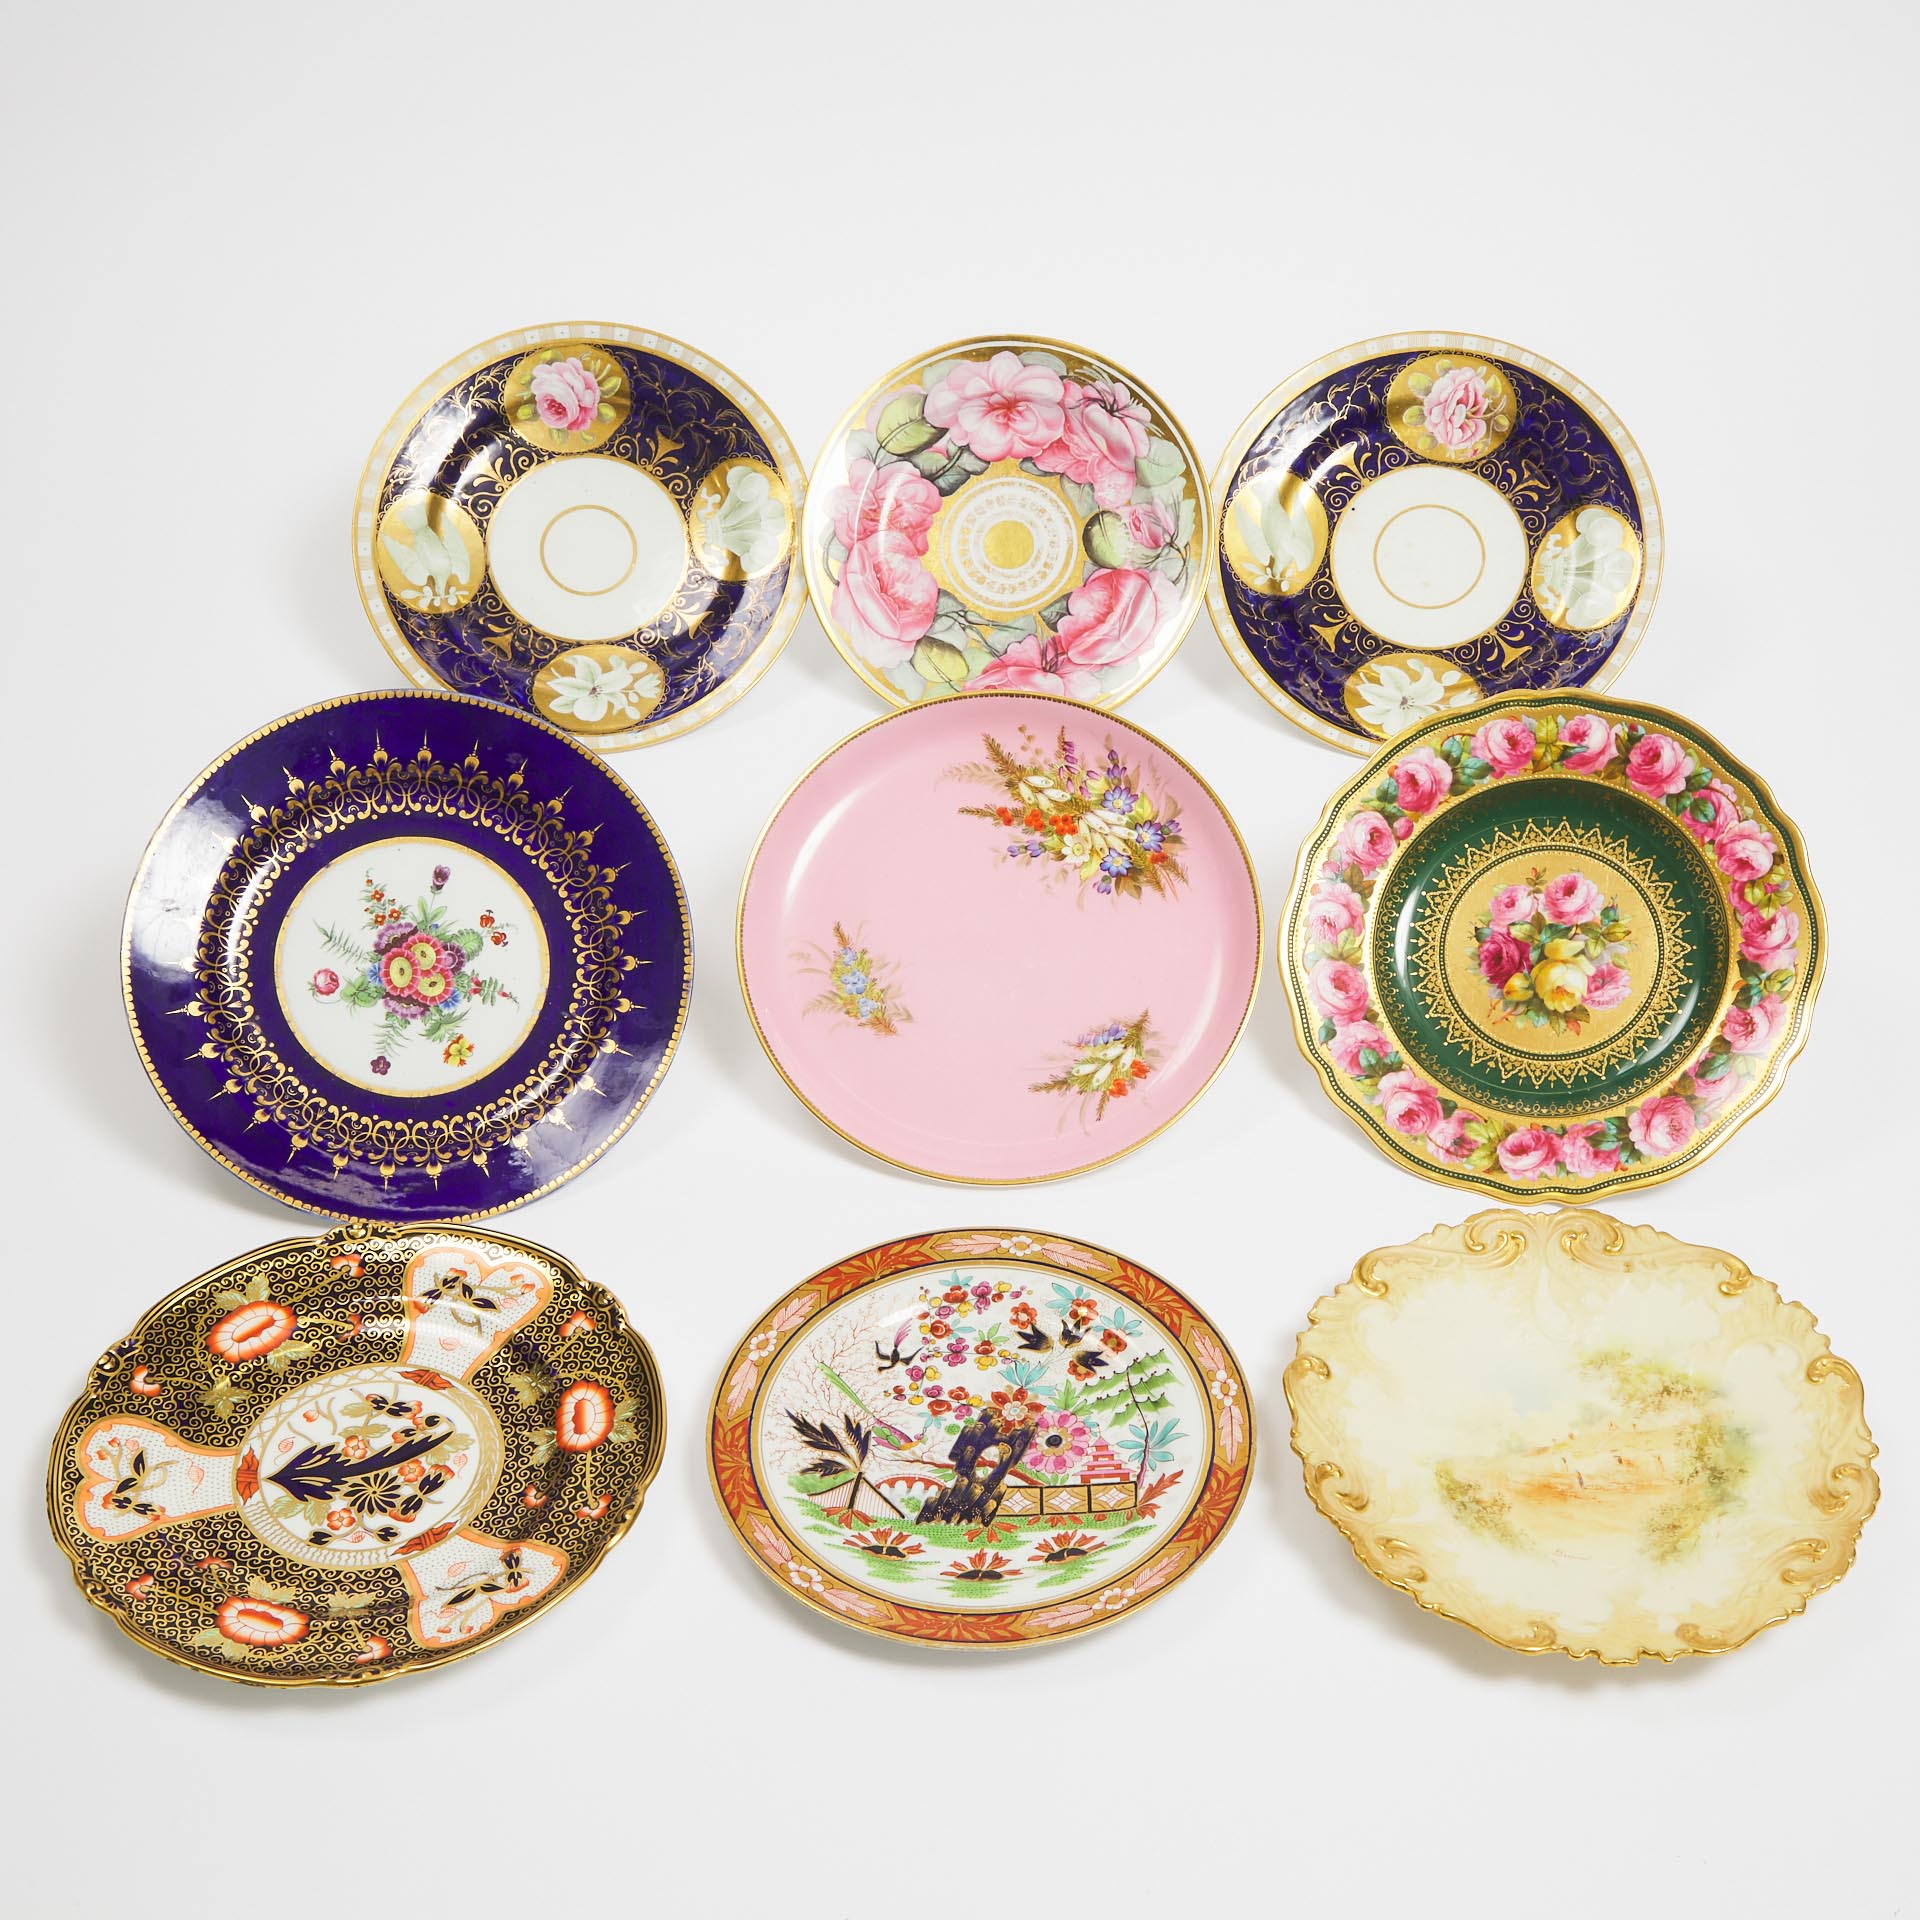 Nine Various English Porcelain Plates, mainly Worcester, 19th/early 20th century